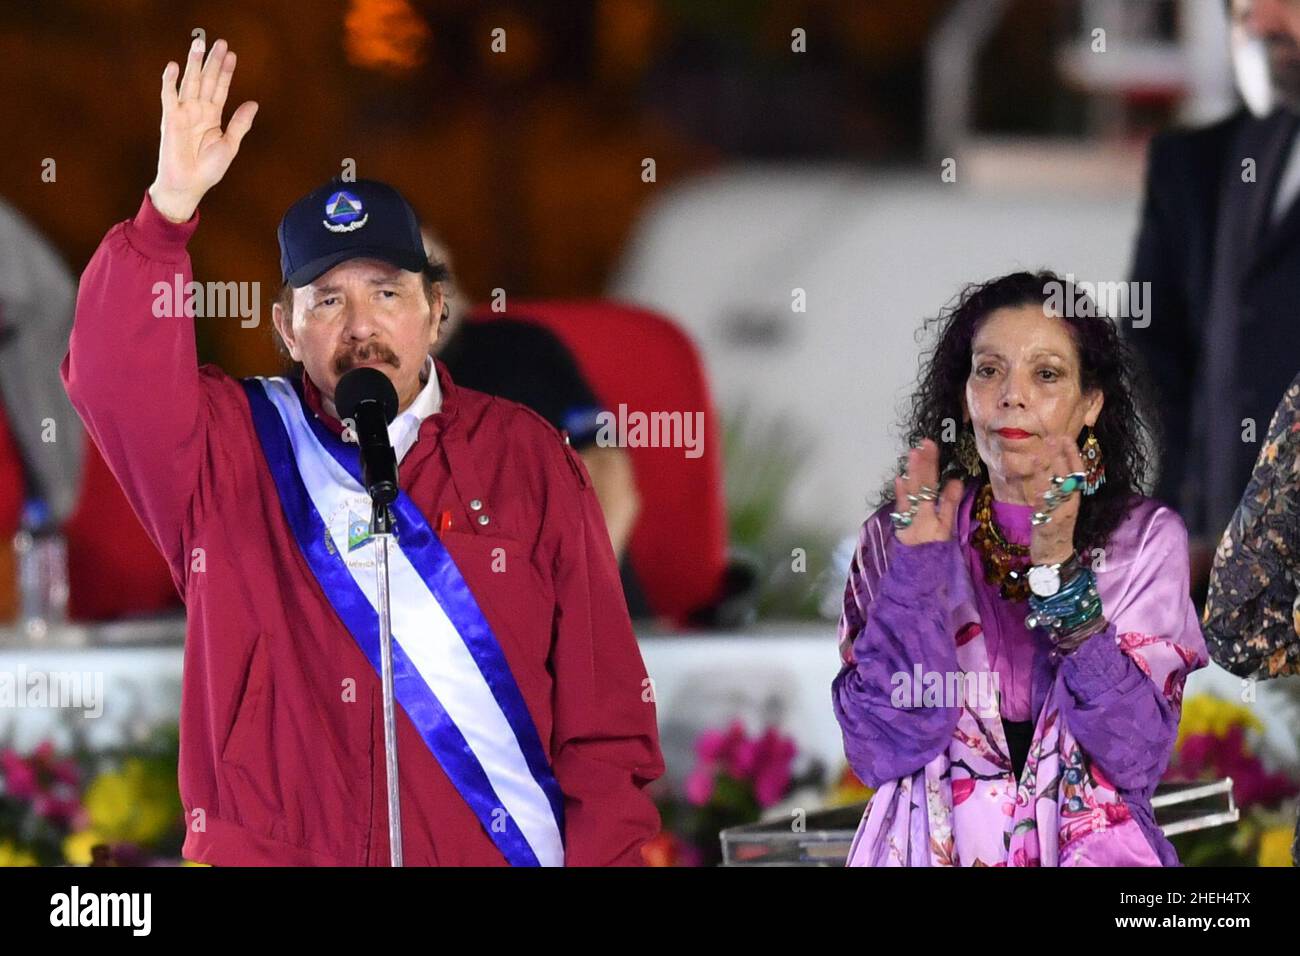 Managua, Nicaragua. 10th Jan, 2022. Nicaraguan President Daniel Ortega (L) and Vice President Rosario Murillo attend the swearing-in ceremony for a new presidential term in Managua, Nicaragua, Jan. 10, 2022. Nicaraguan President Daniel Ortega was sworn in for a new presidential term on Monday. Ortega and Vice President Rosario Murillo were reelected in the last general election in November last year. Credit: Xin Yuewei/Xinhua/Alamy Live News Stock Photo